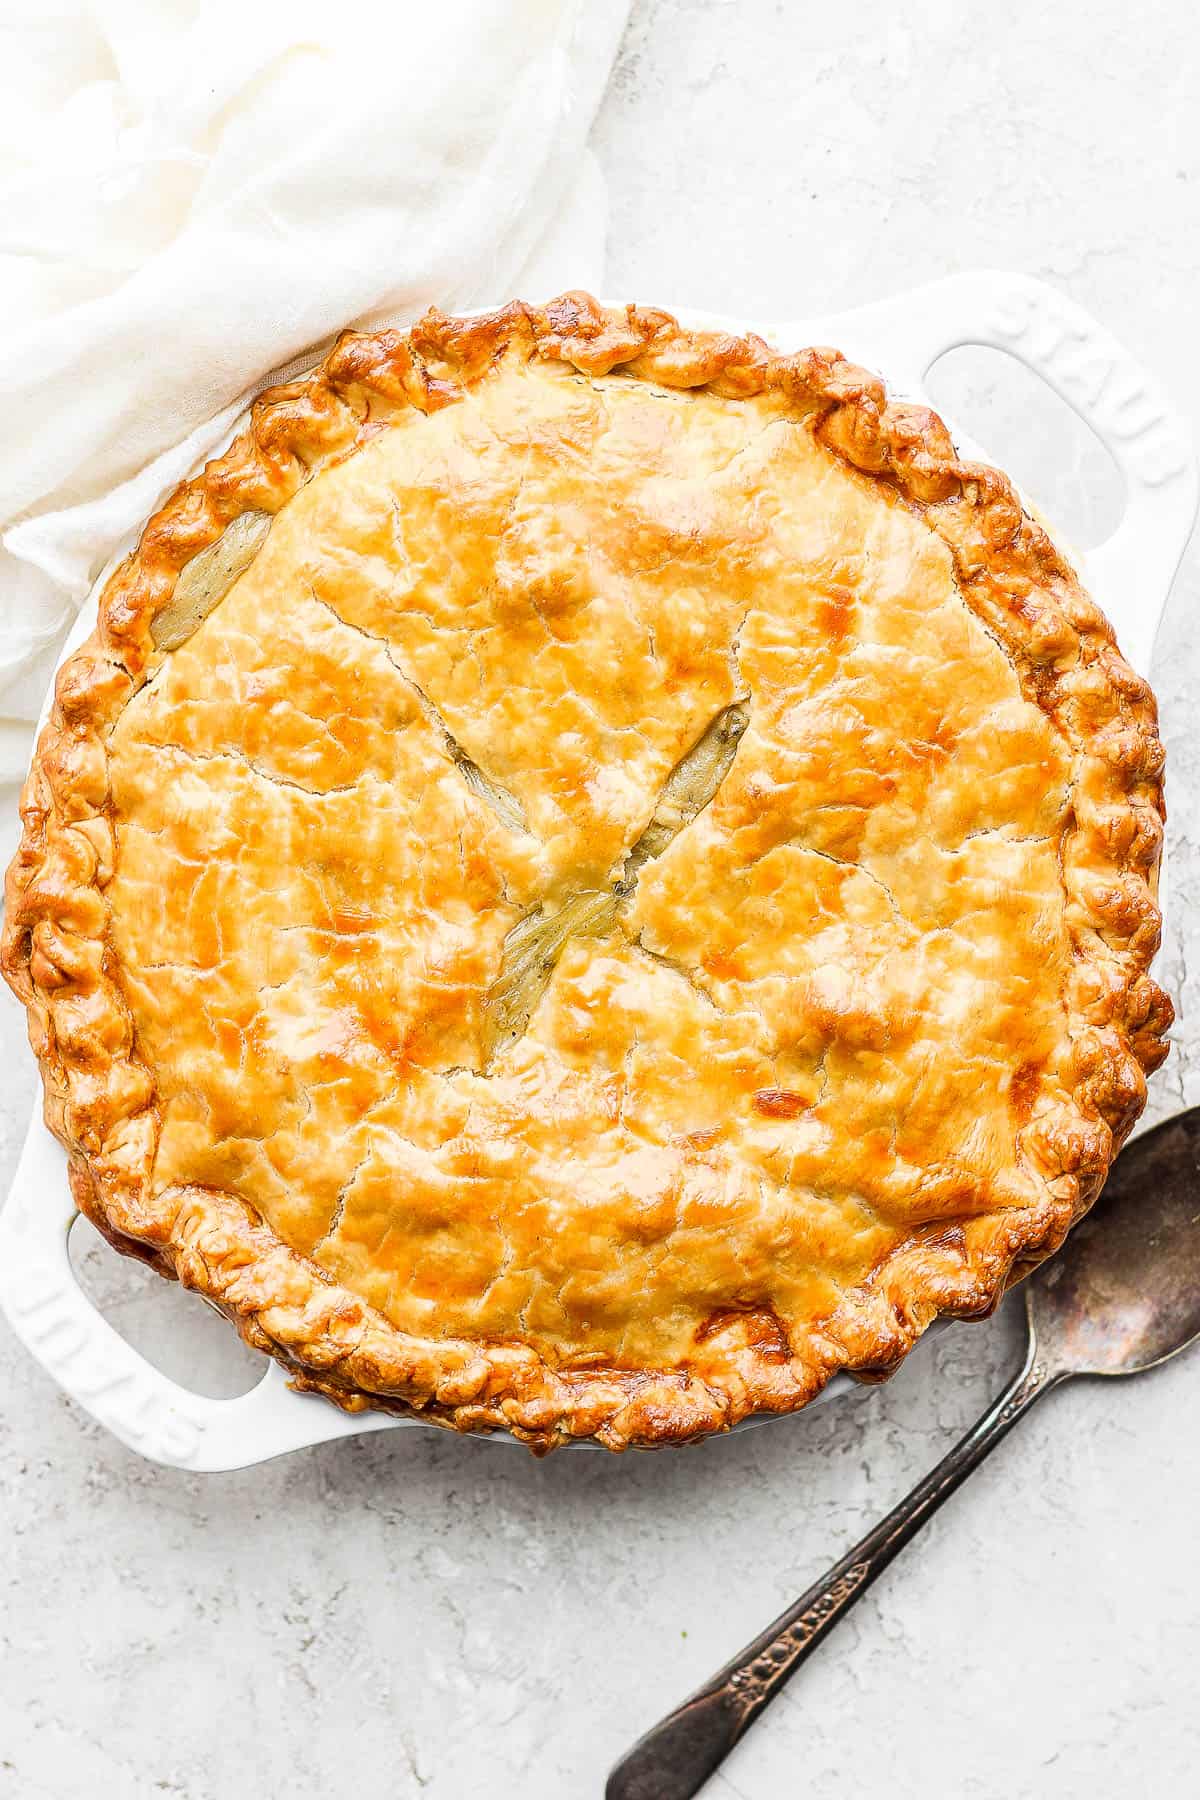 A fully baked chicken pot pie.